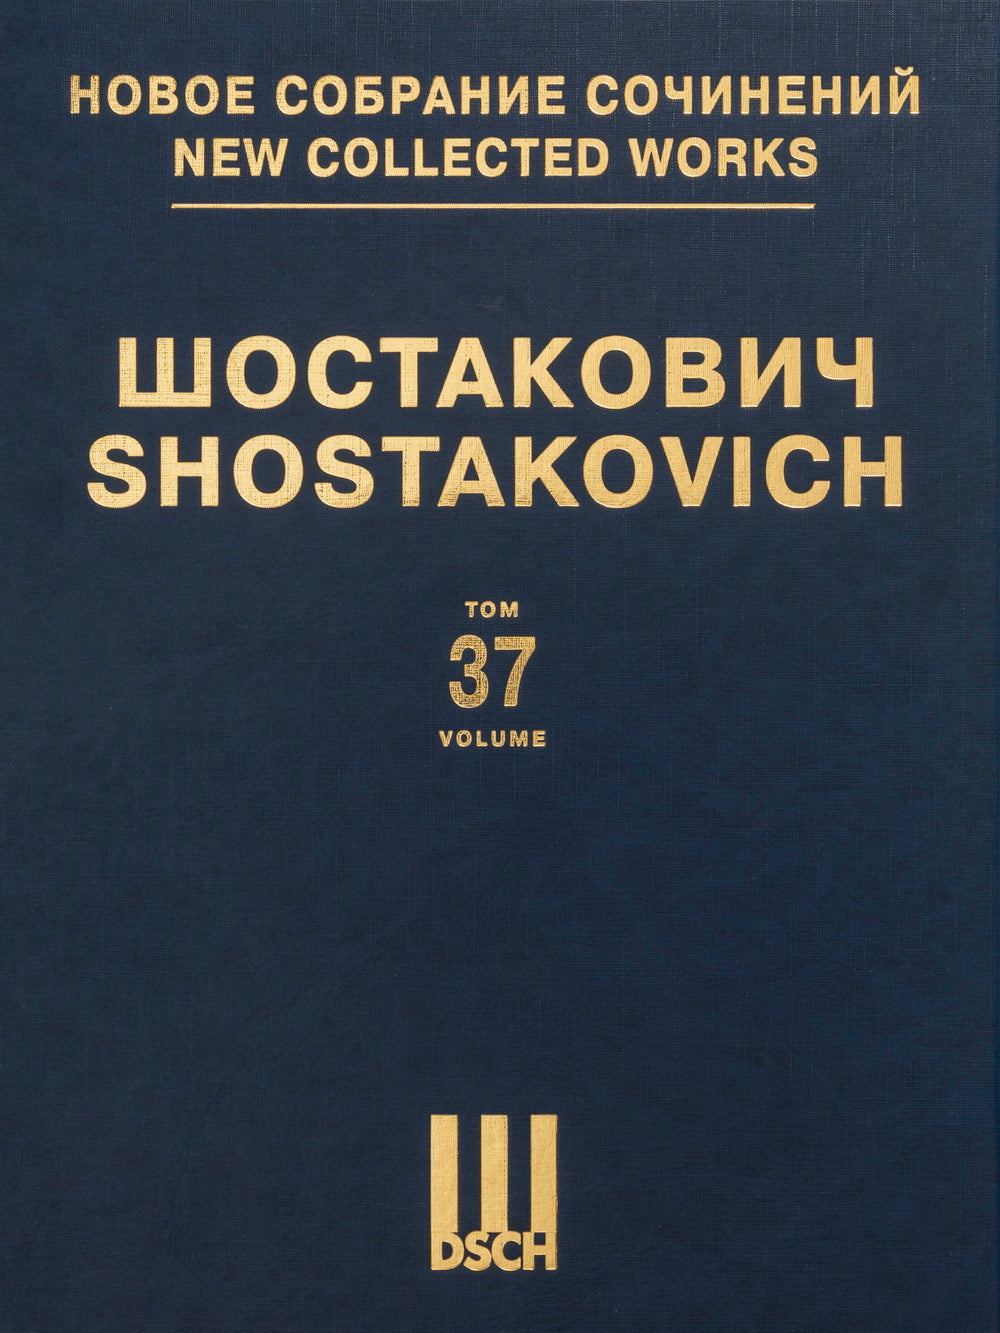 Shostakovich: Orchestral Compositions arr. for Piano and Piano 4-Hands